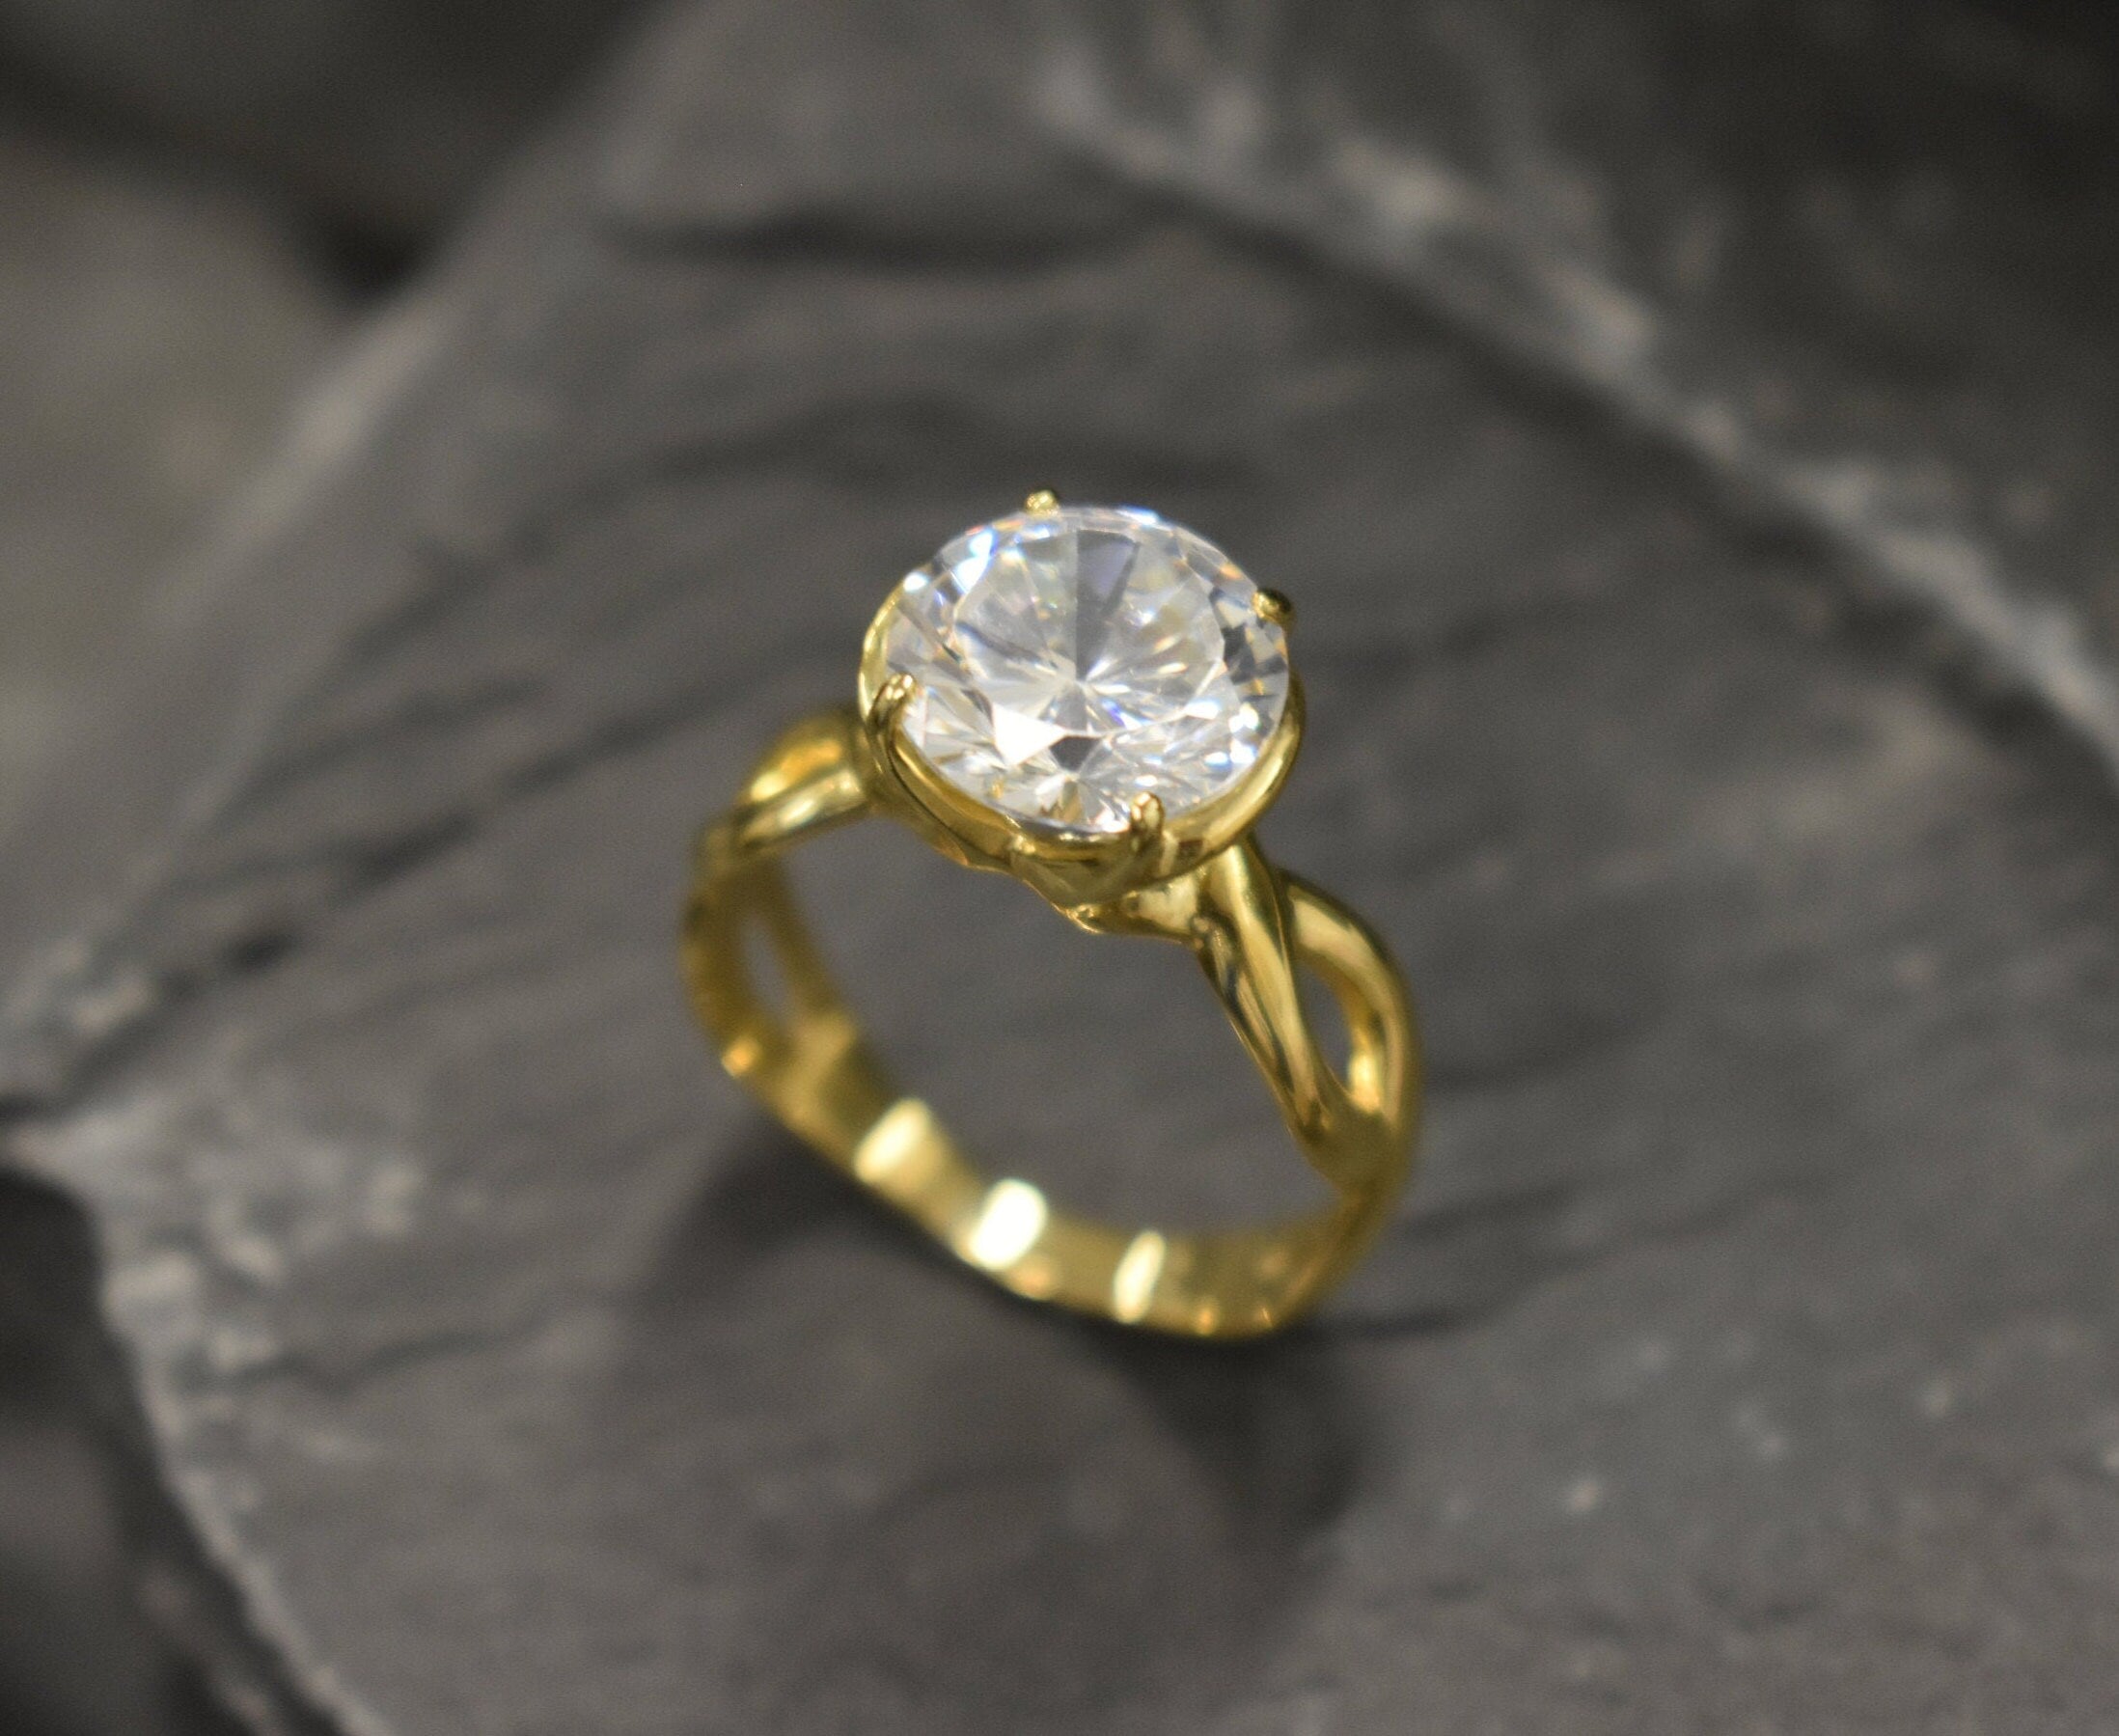 Gold Diamond Ring, Diamond Ring, Created Diamond Ring, Gold Engagement Ring, Vintage Ring, Solitaire Ring, Sparkly Ring, Solid Silver Ring